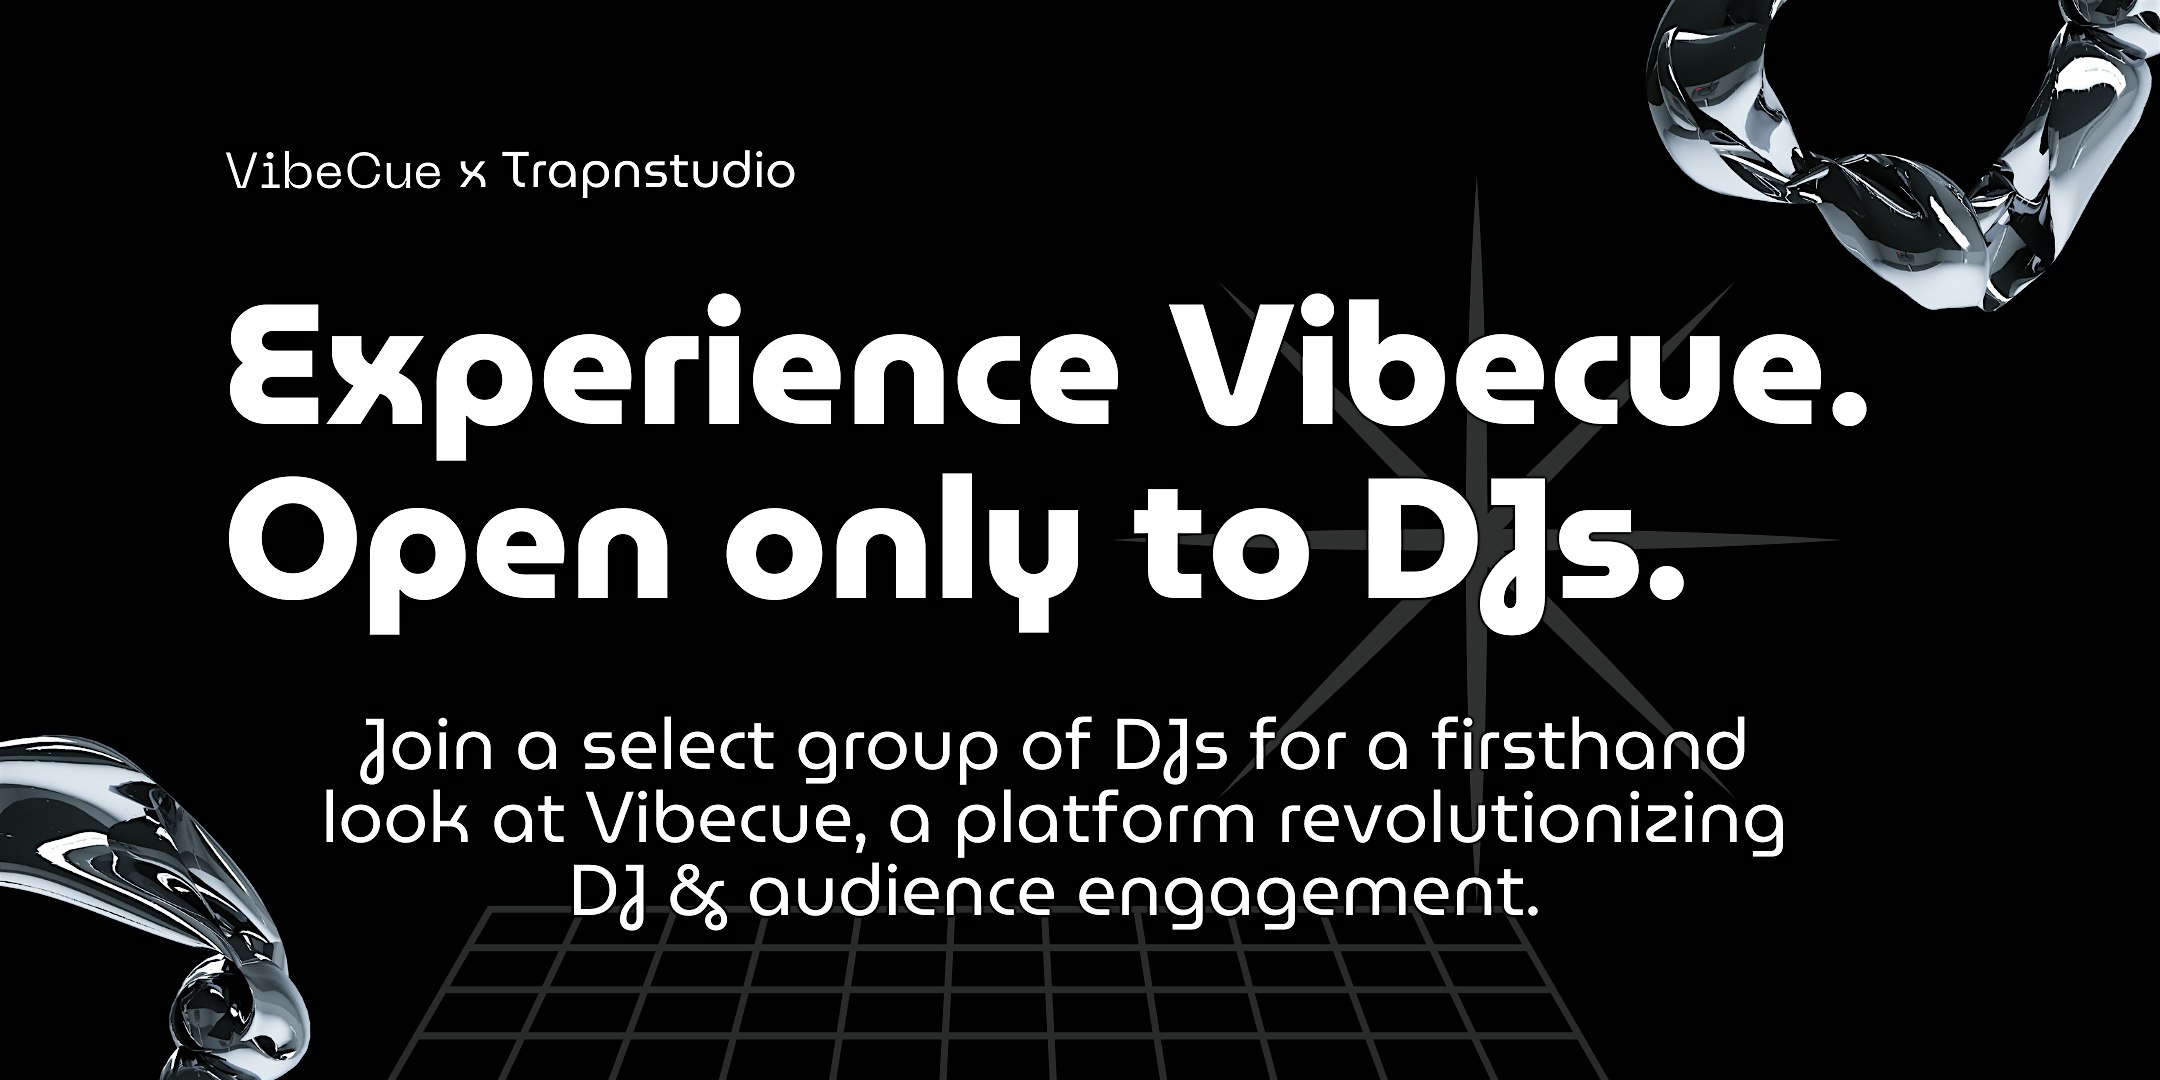 Experience Vibecue, Open only to DJs